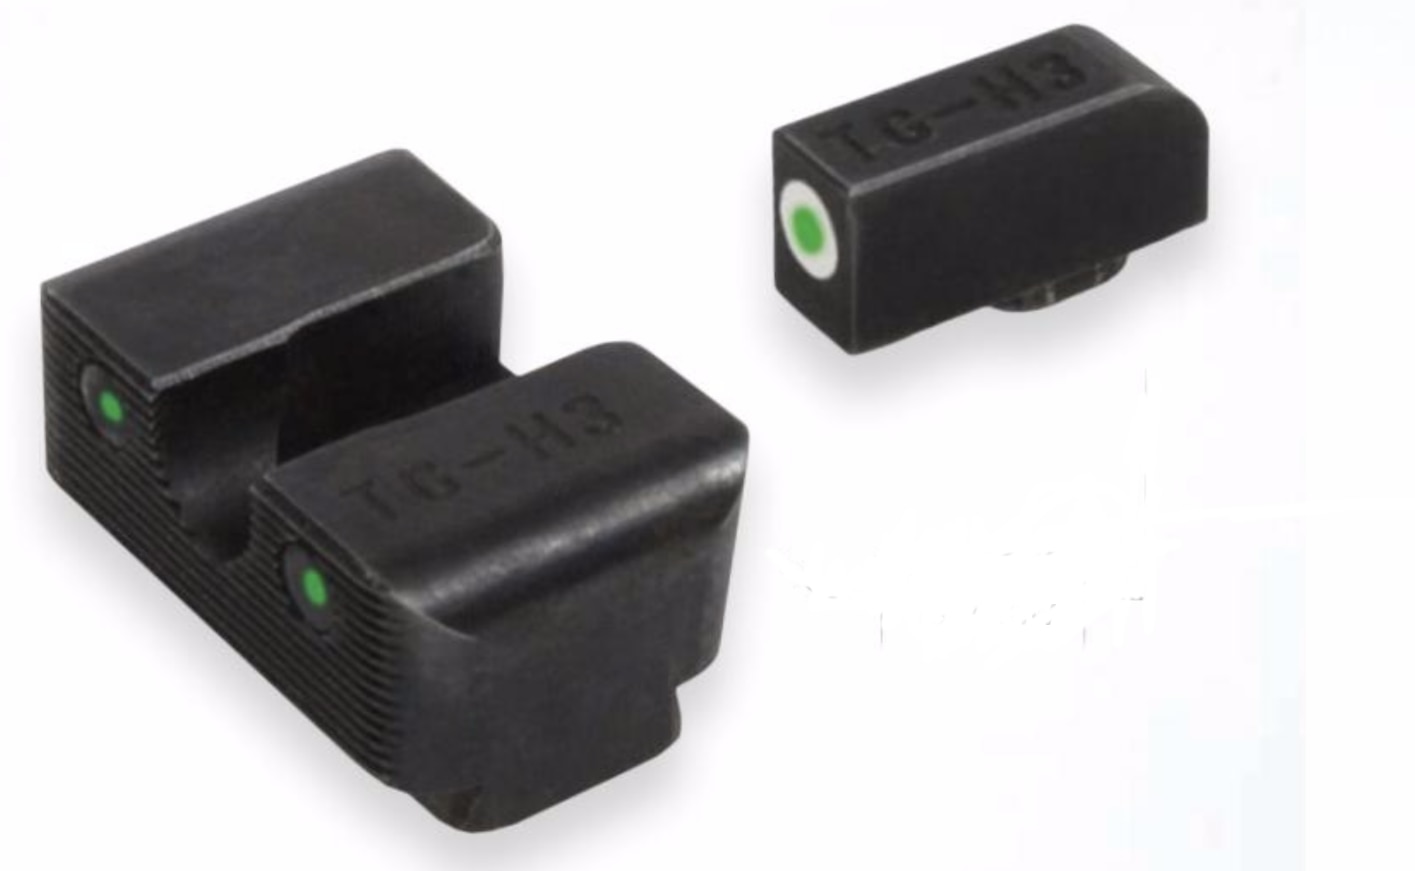 Truglo's Tritium Pro Night Sights are offered for a host of firearms including Beretta, Glock, Smith & Wesson and Springfield Armory. (Photo: Truglo)